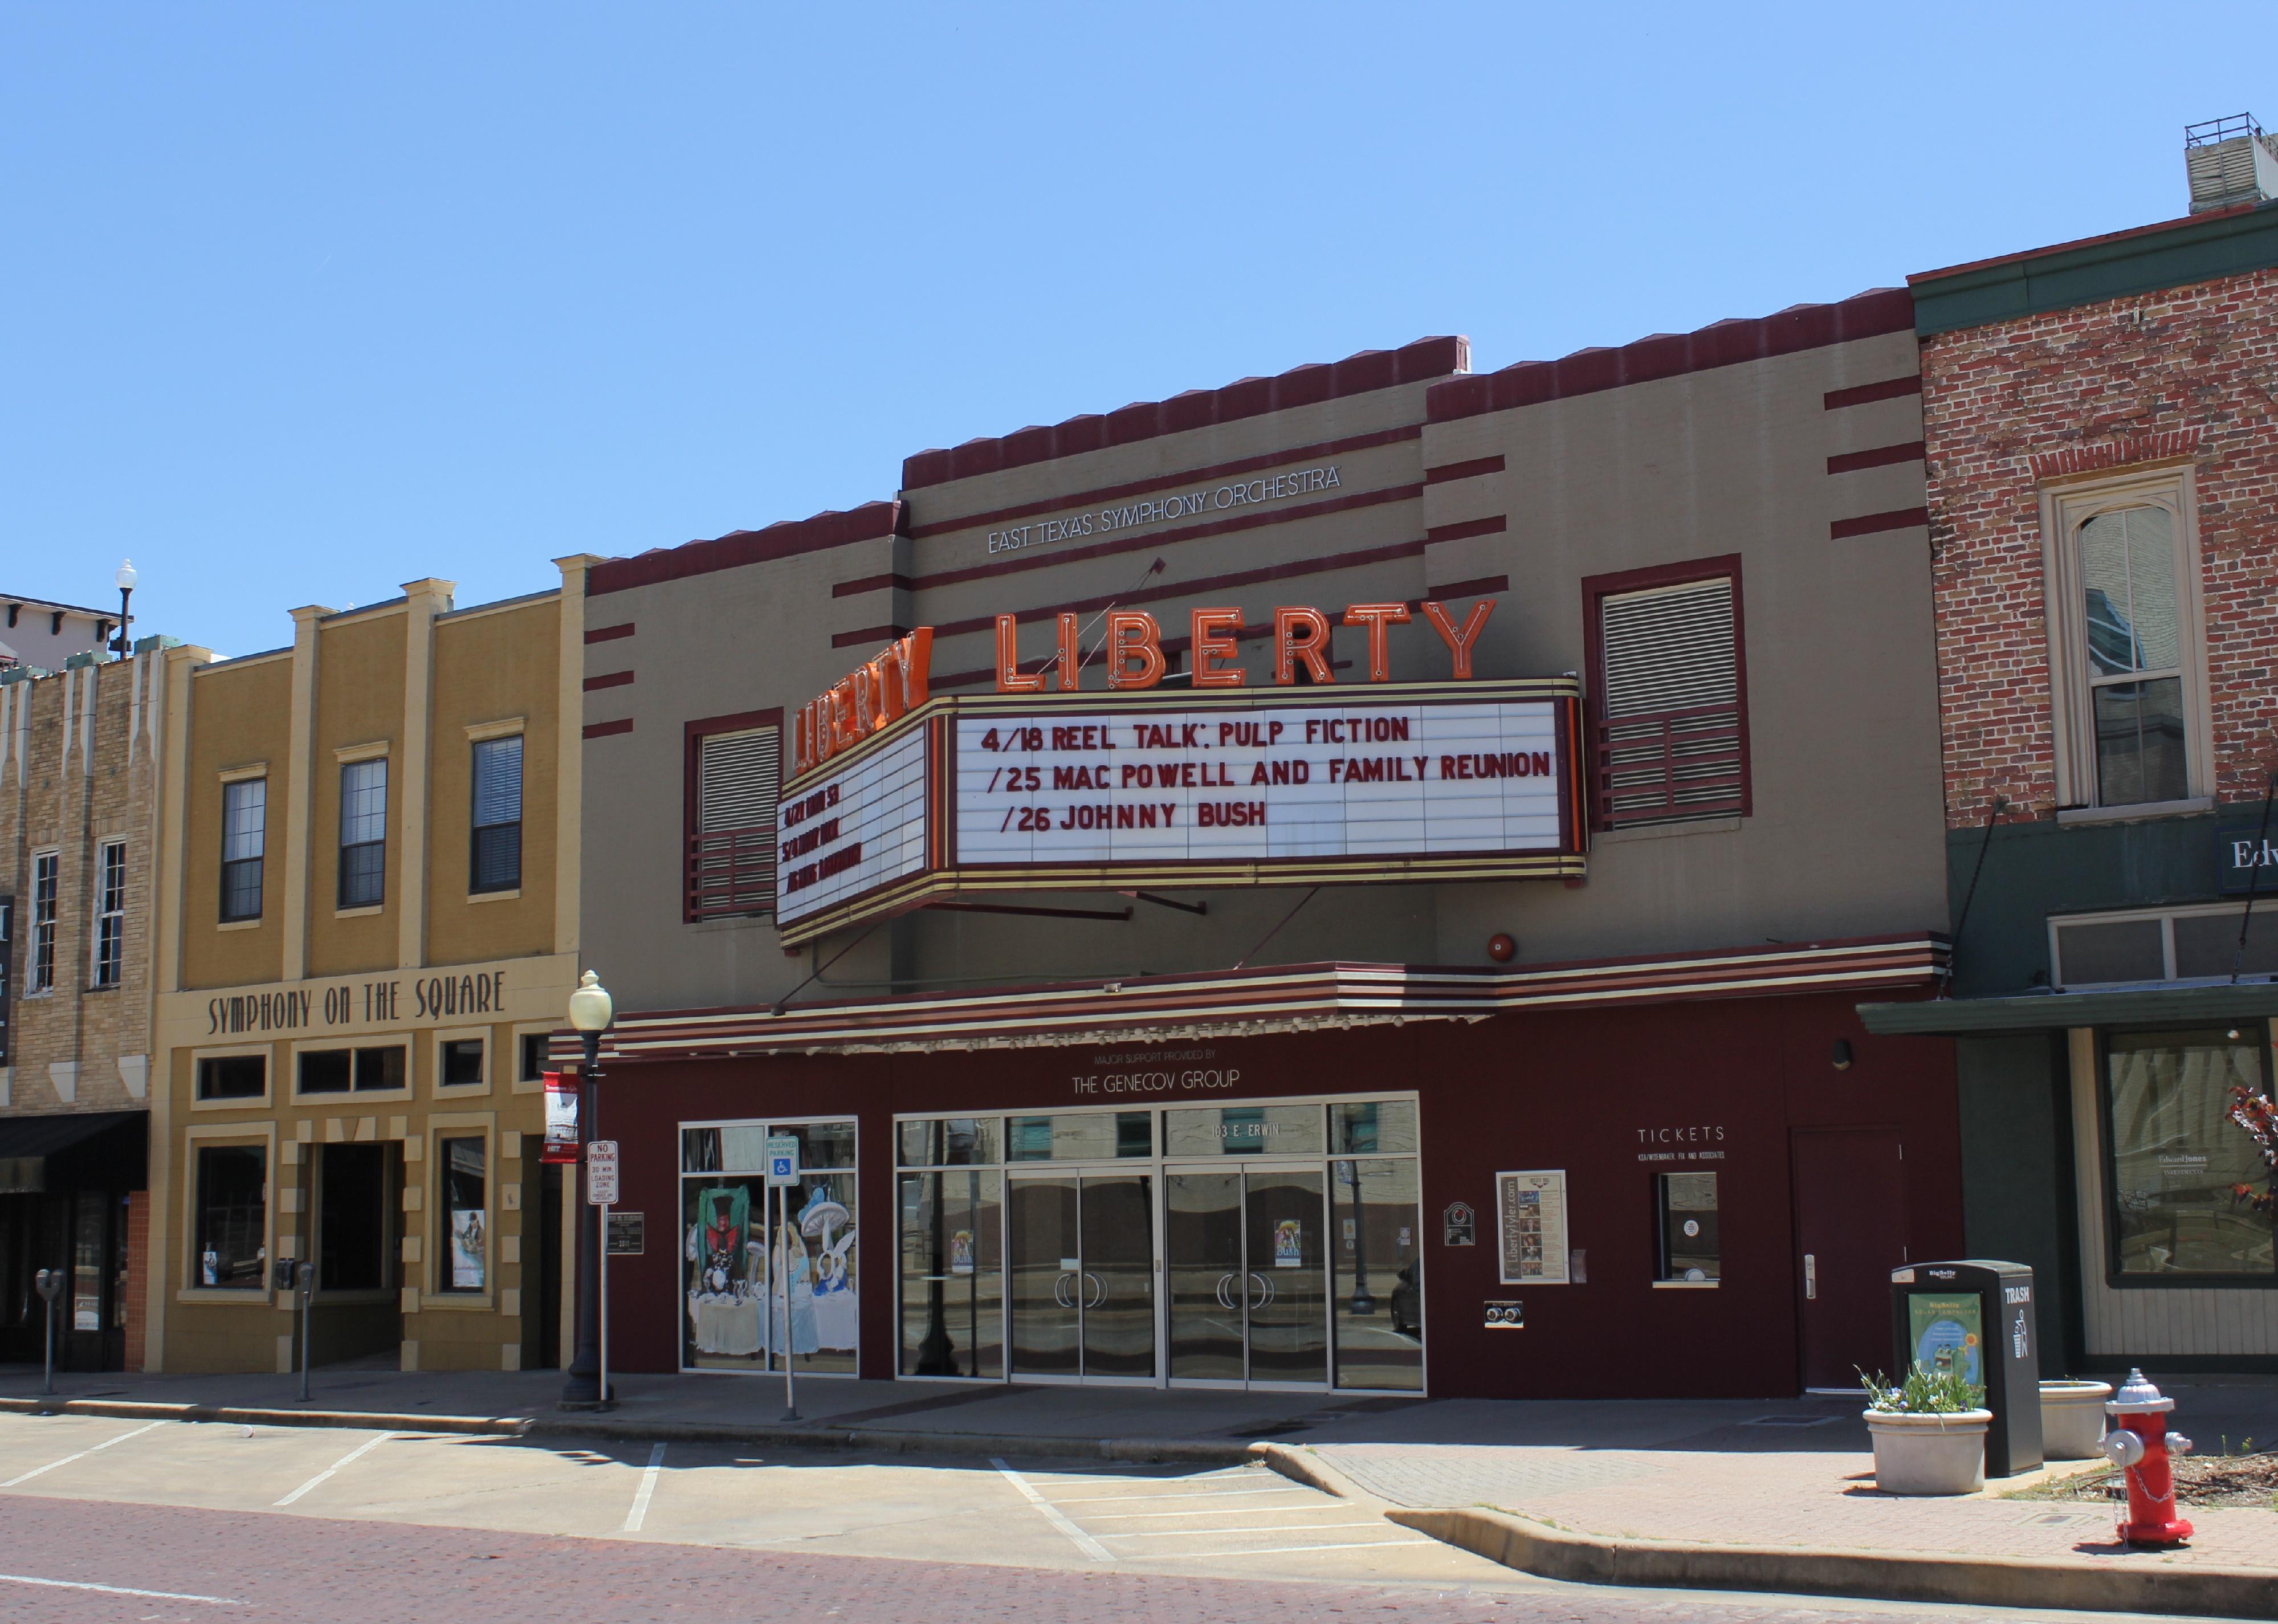 Liberty Theater and East Texas Symphony located in downtown Tyler.